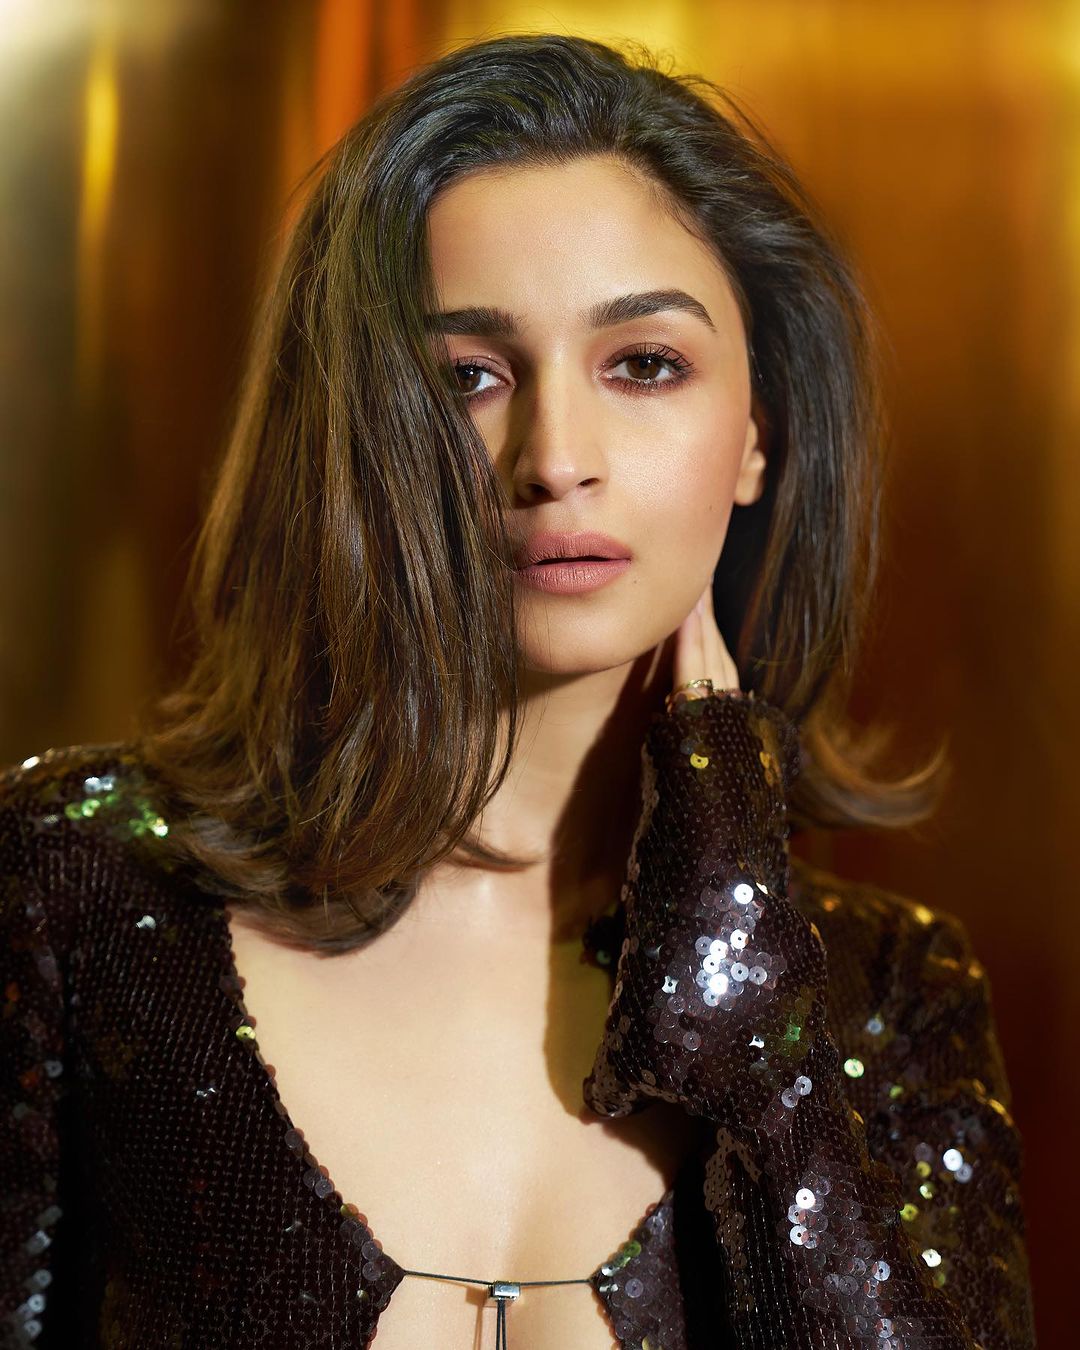 Alia Bhatt Inspired 5 Hot Black Gowns To Have For Your Wardrobe | IWMBuzz